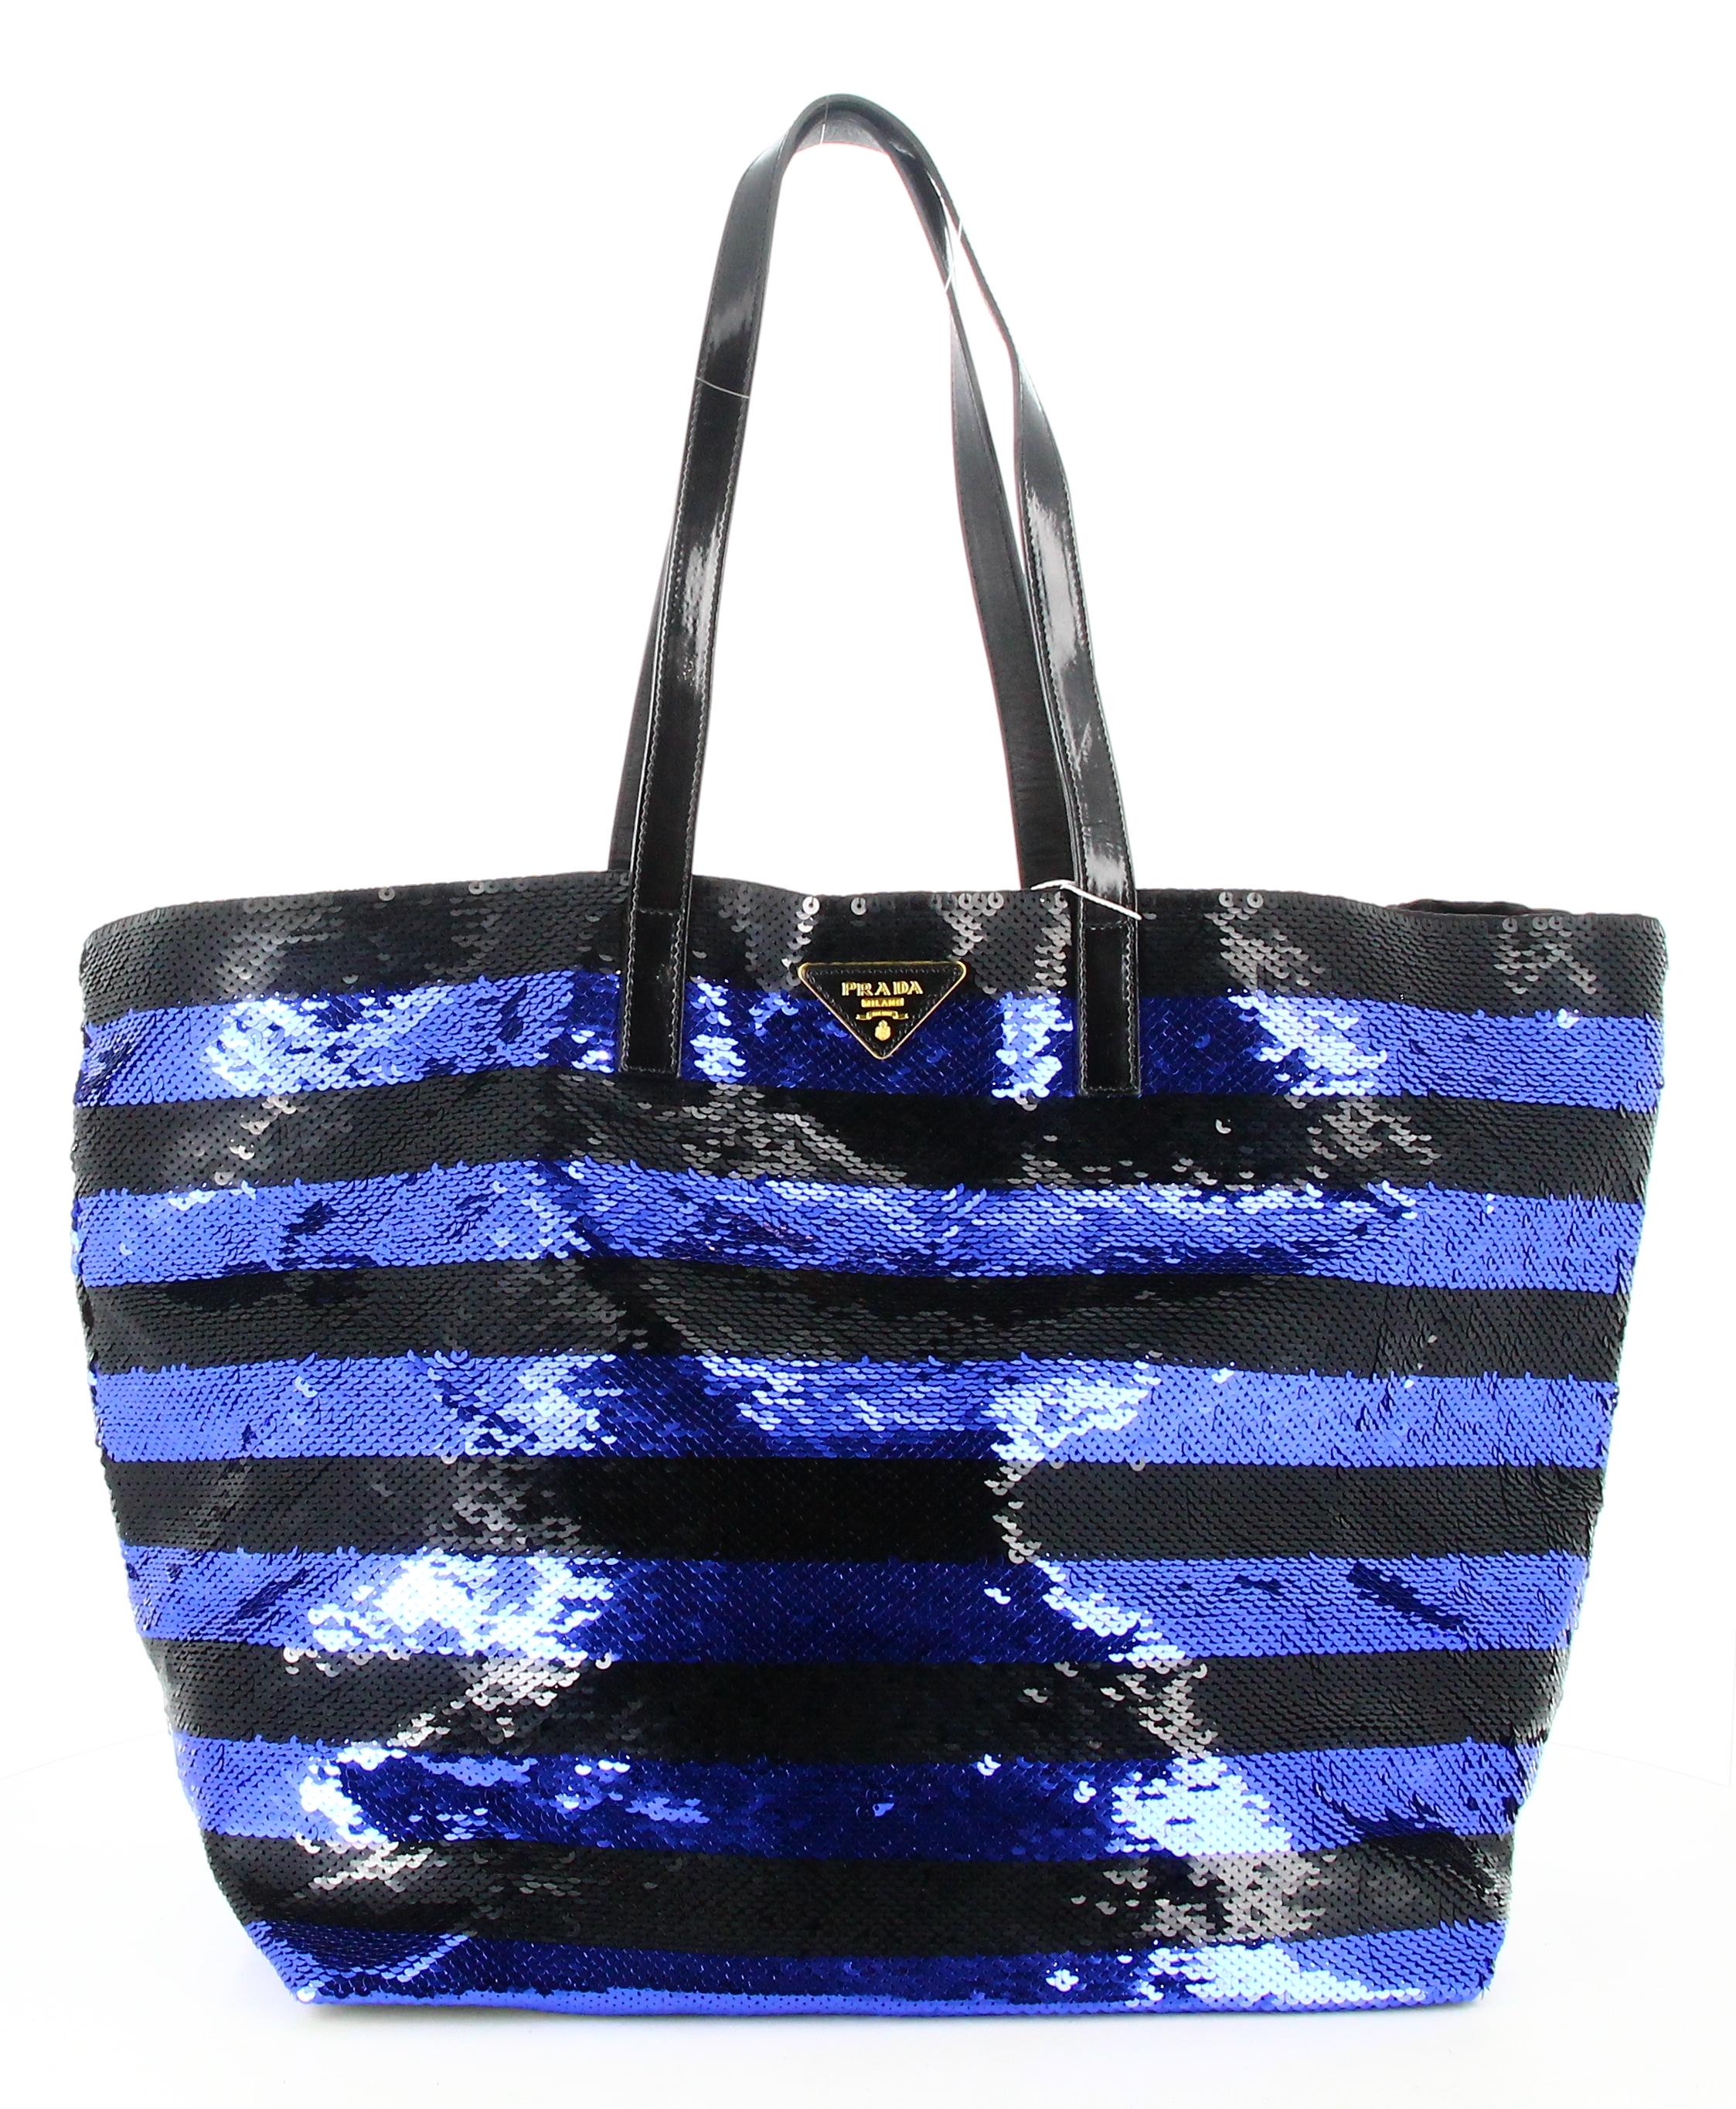 Prada Blue And Black Tote Shiny Strass Stripe 

- Very good condition. No signs of wear over time. 
- Prada tote bag
- Shiny rhinestone
- Blue and black stripe 
- Two black varnish straps
- Interior: black satin plus inside pocket